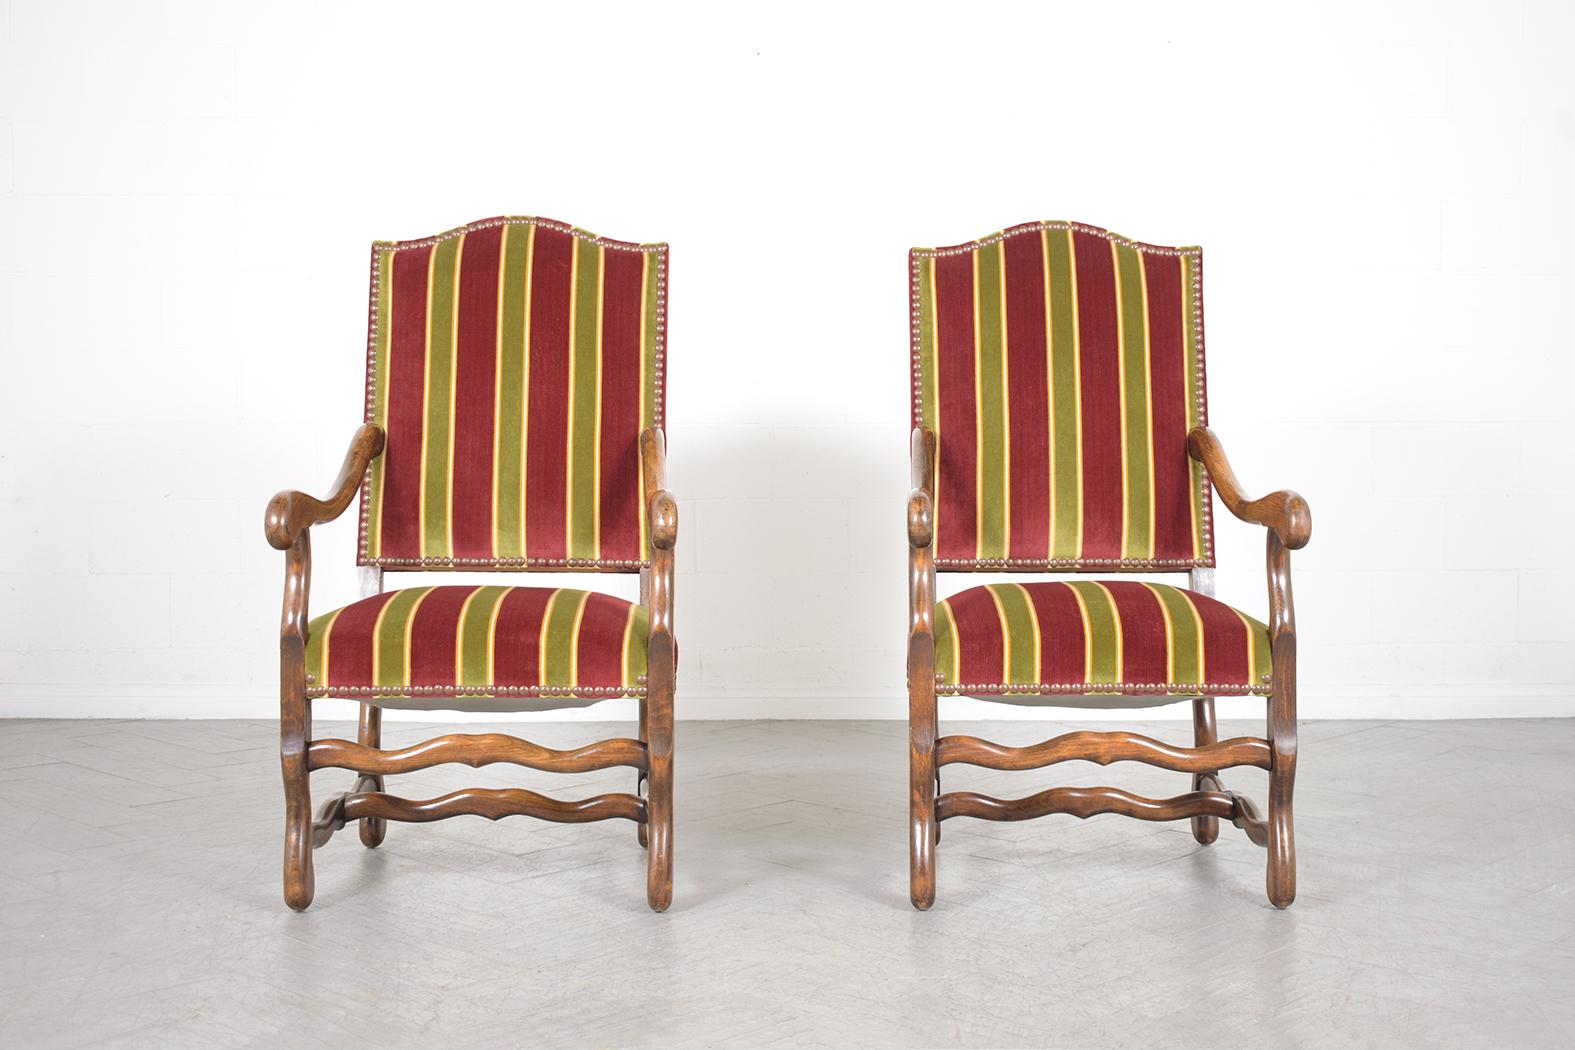 French Provincial 19th Century French Armchairs: Dark Walnut Finish with Striped Velvet Upholstery For Sale